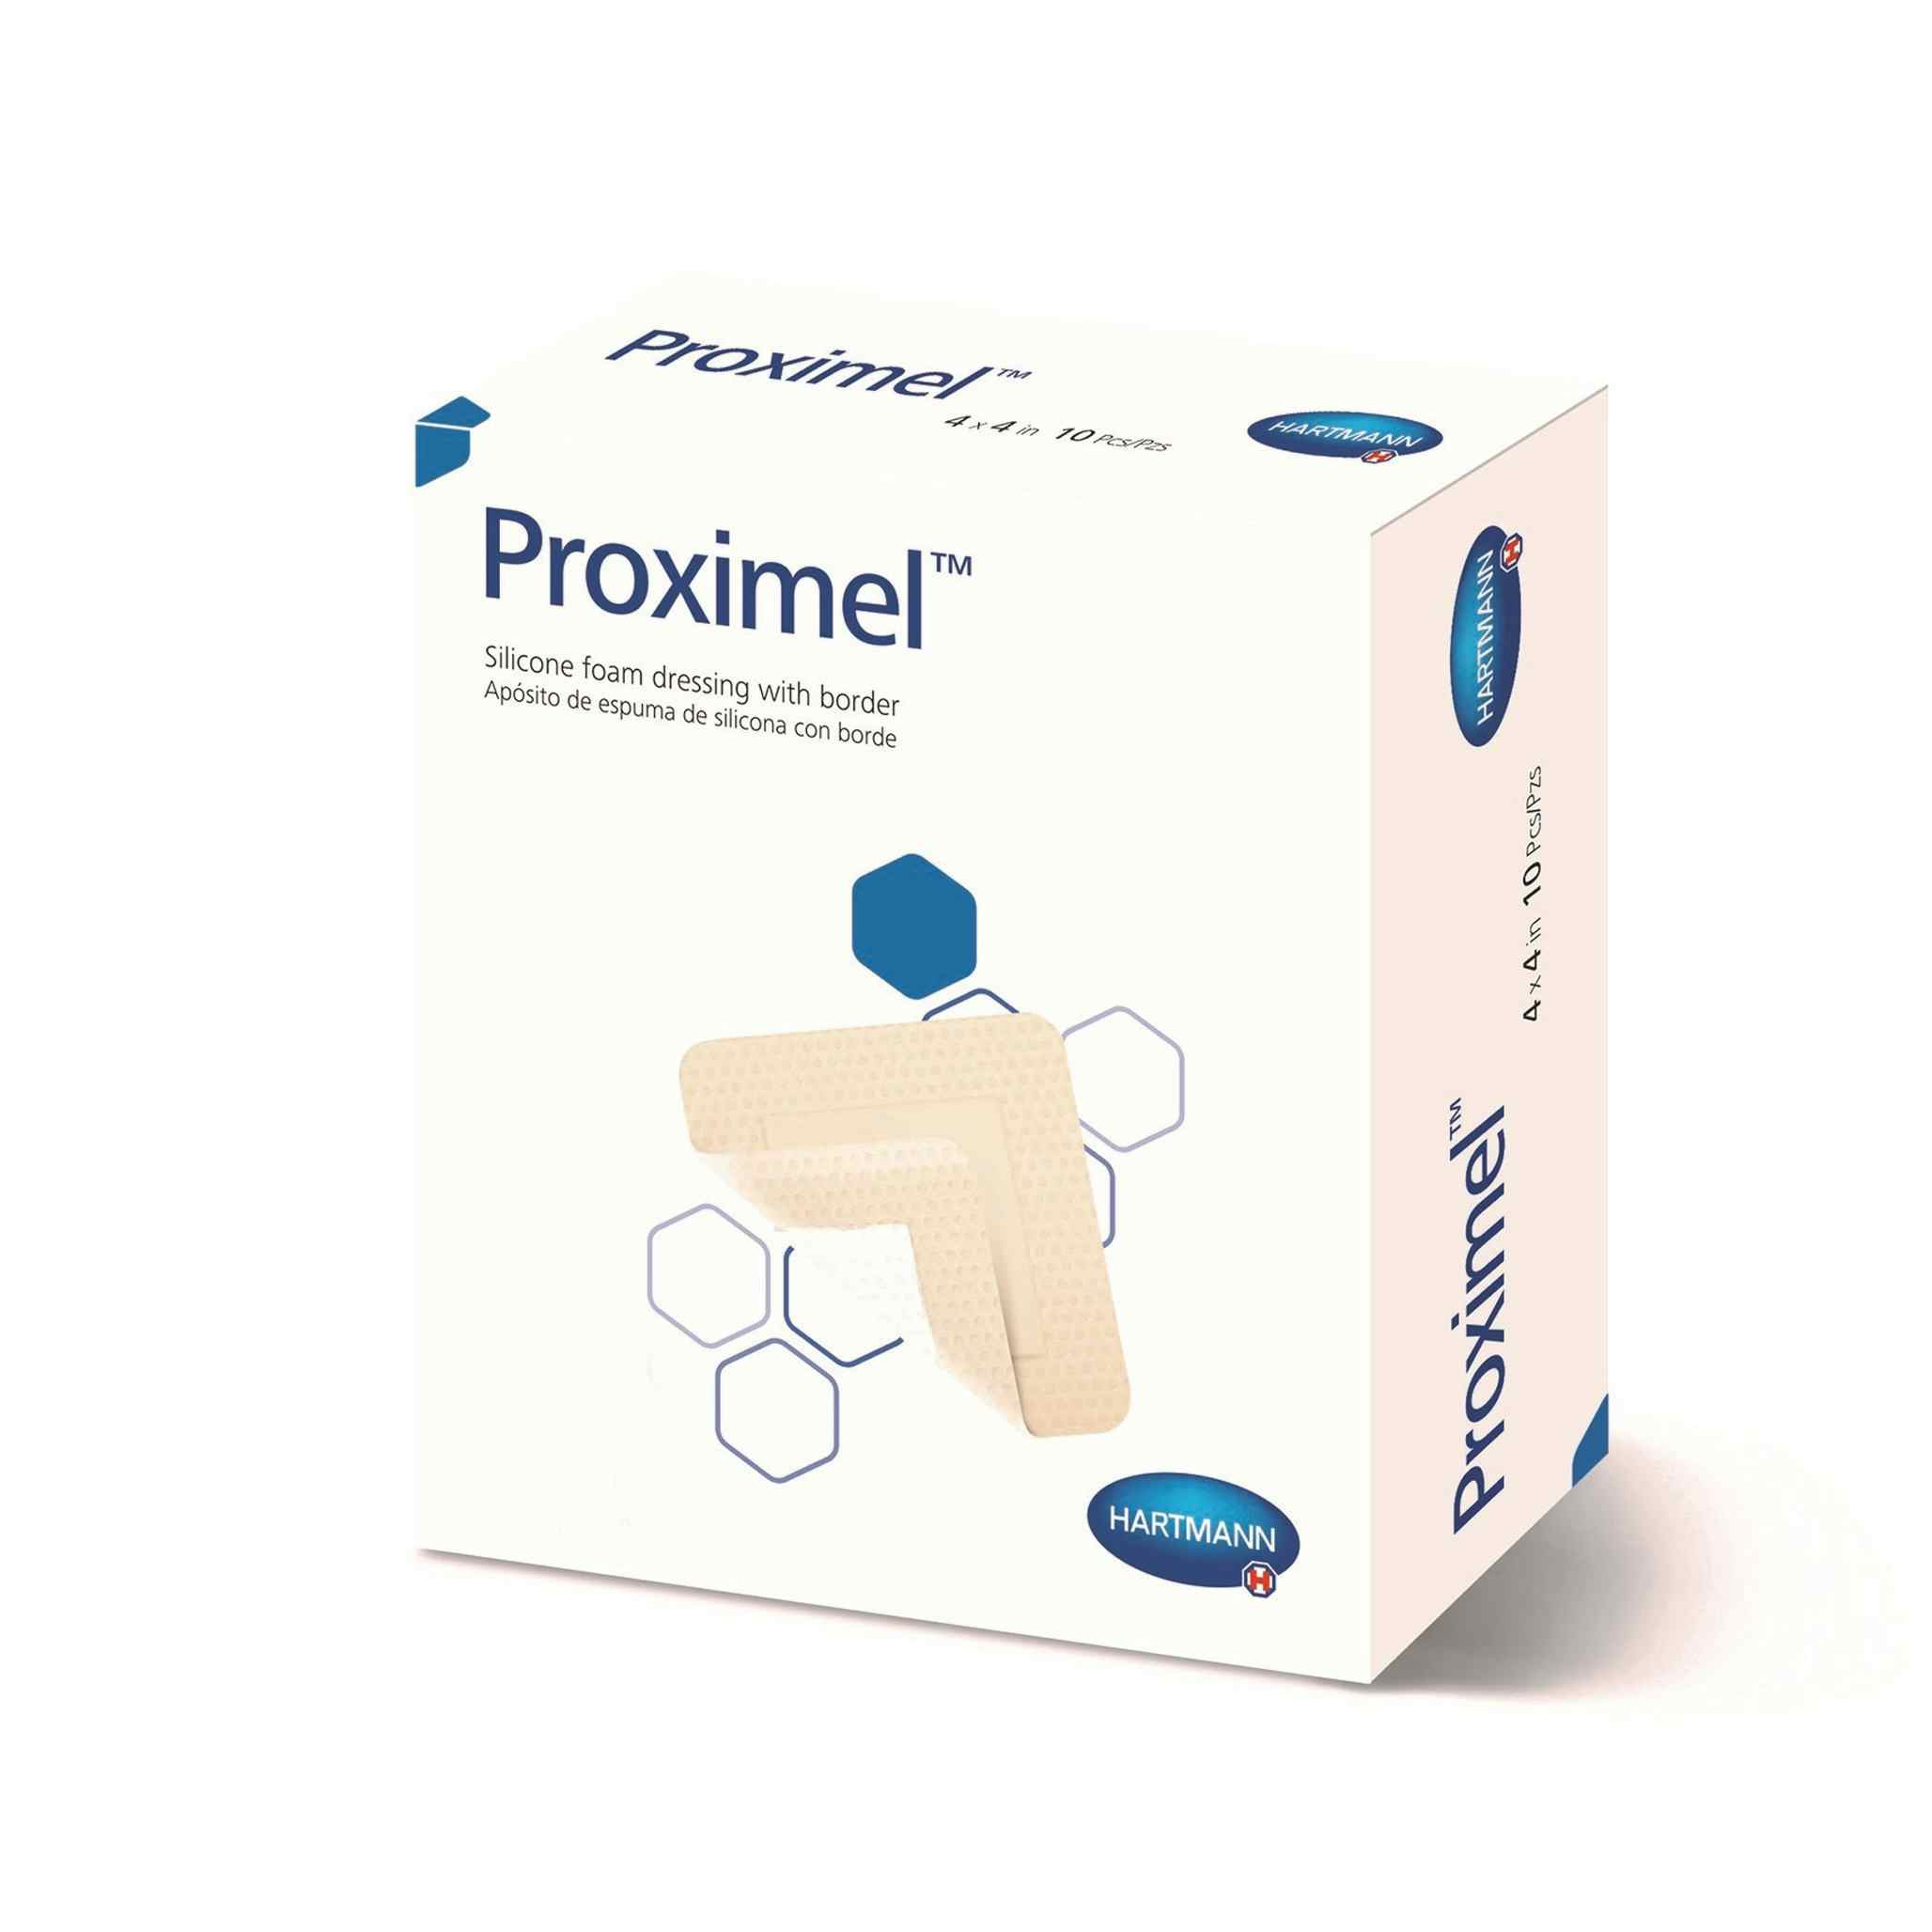 Proximel Silicone Foam Dressings with Border, 6 X 6"